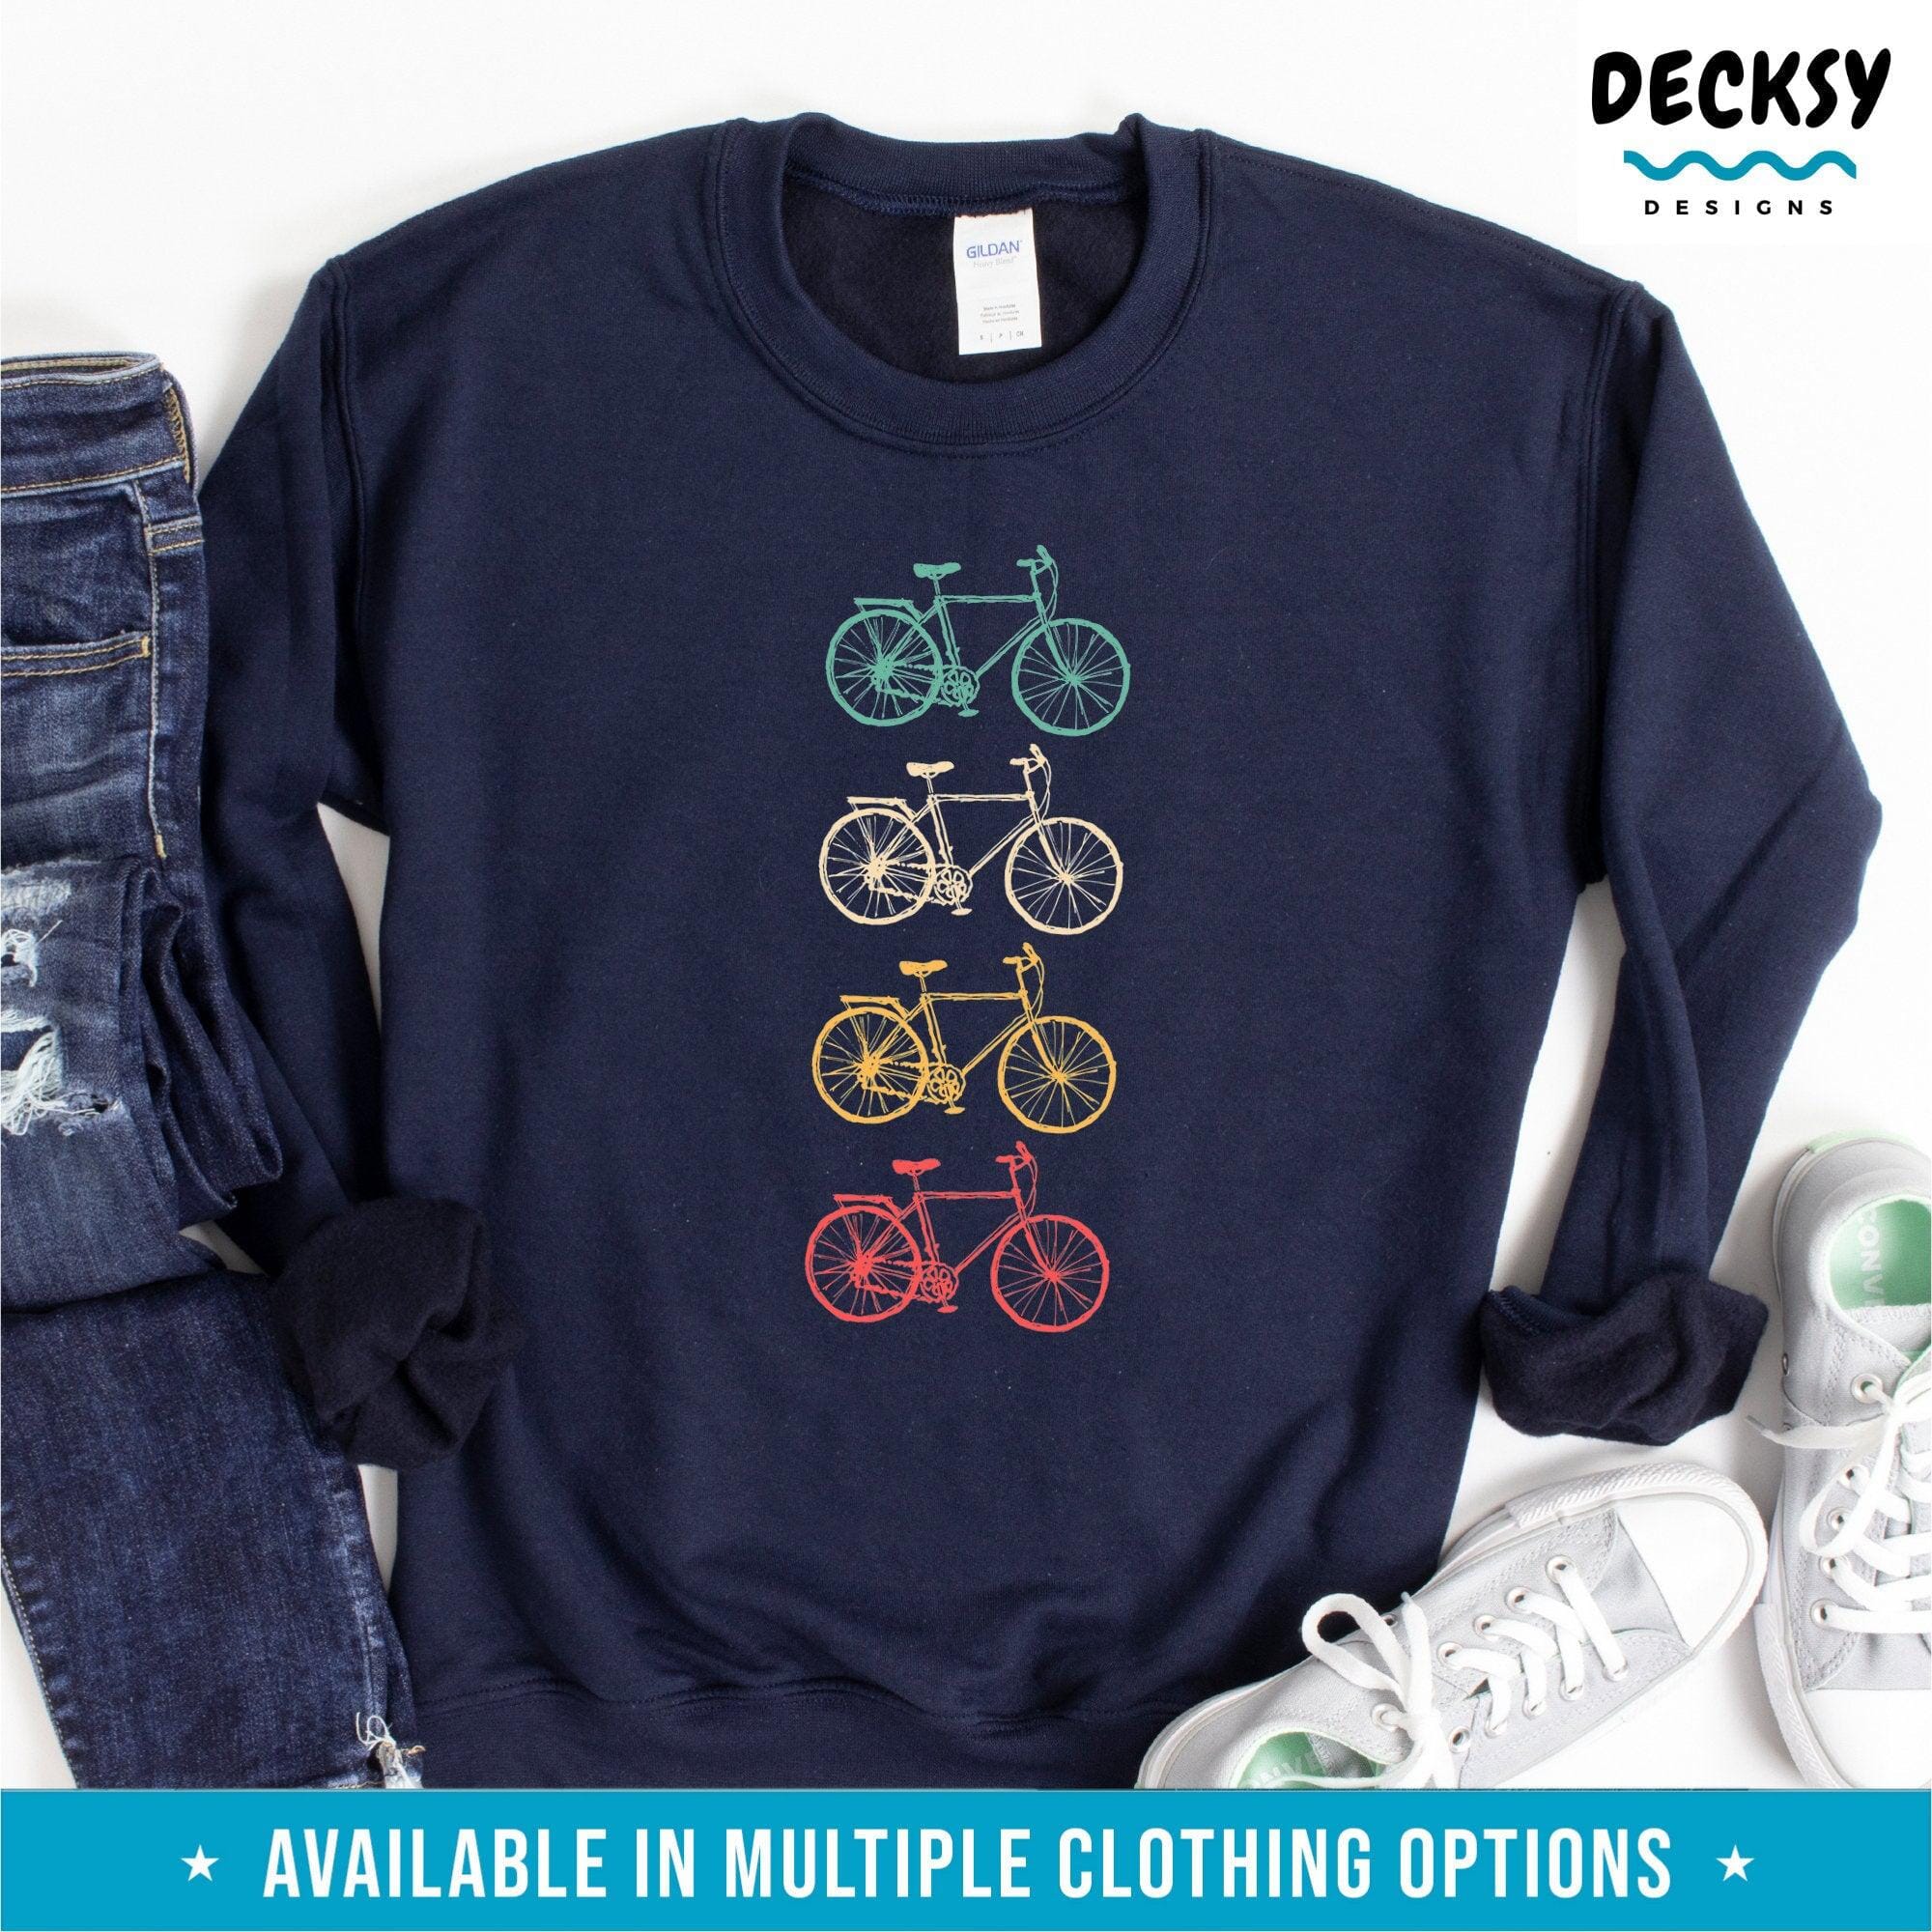 Retro Bike Shirt, Cycling Gift-Clothing:Gender-Neutral Adult Clothing:Tops & Tees:T-shirts:Graphic Tees-DecksyDesigns